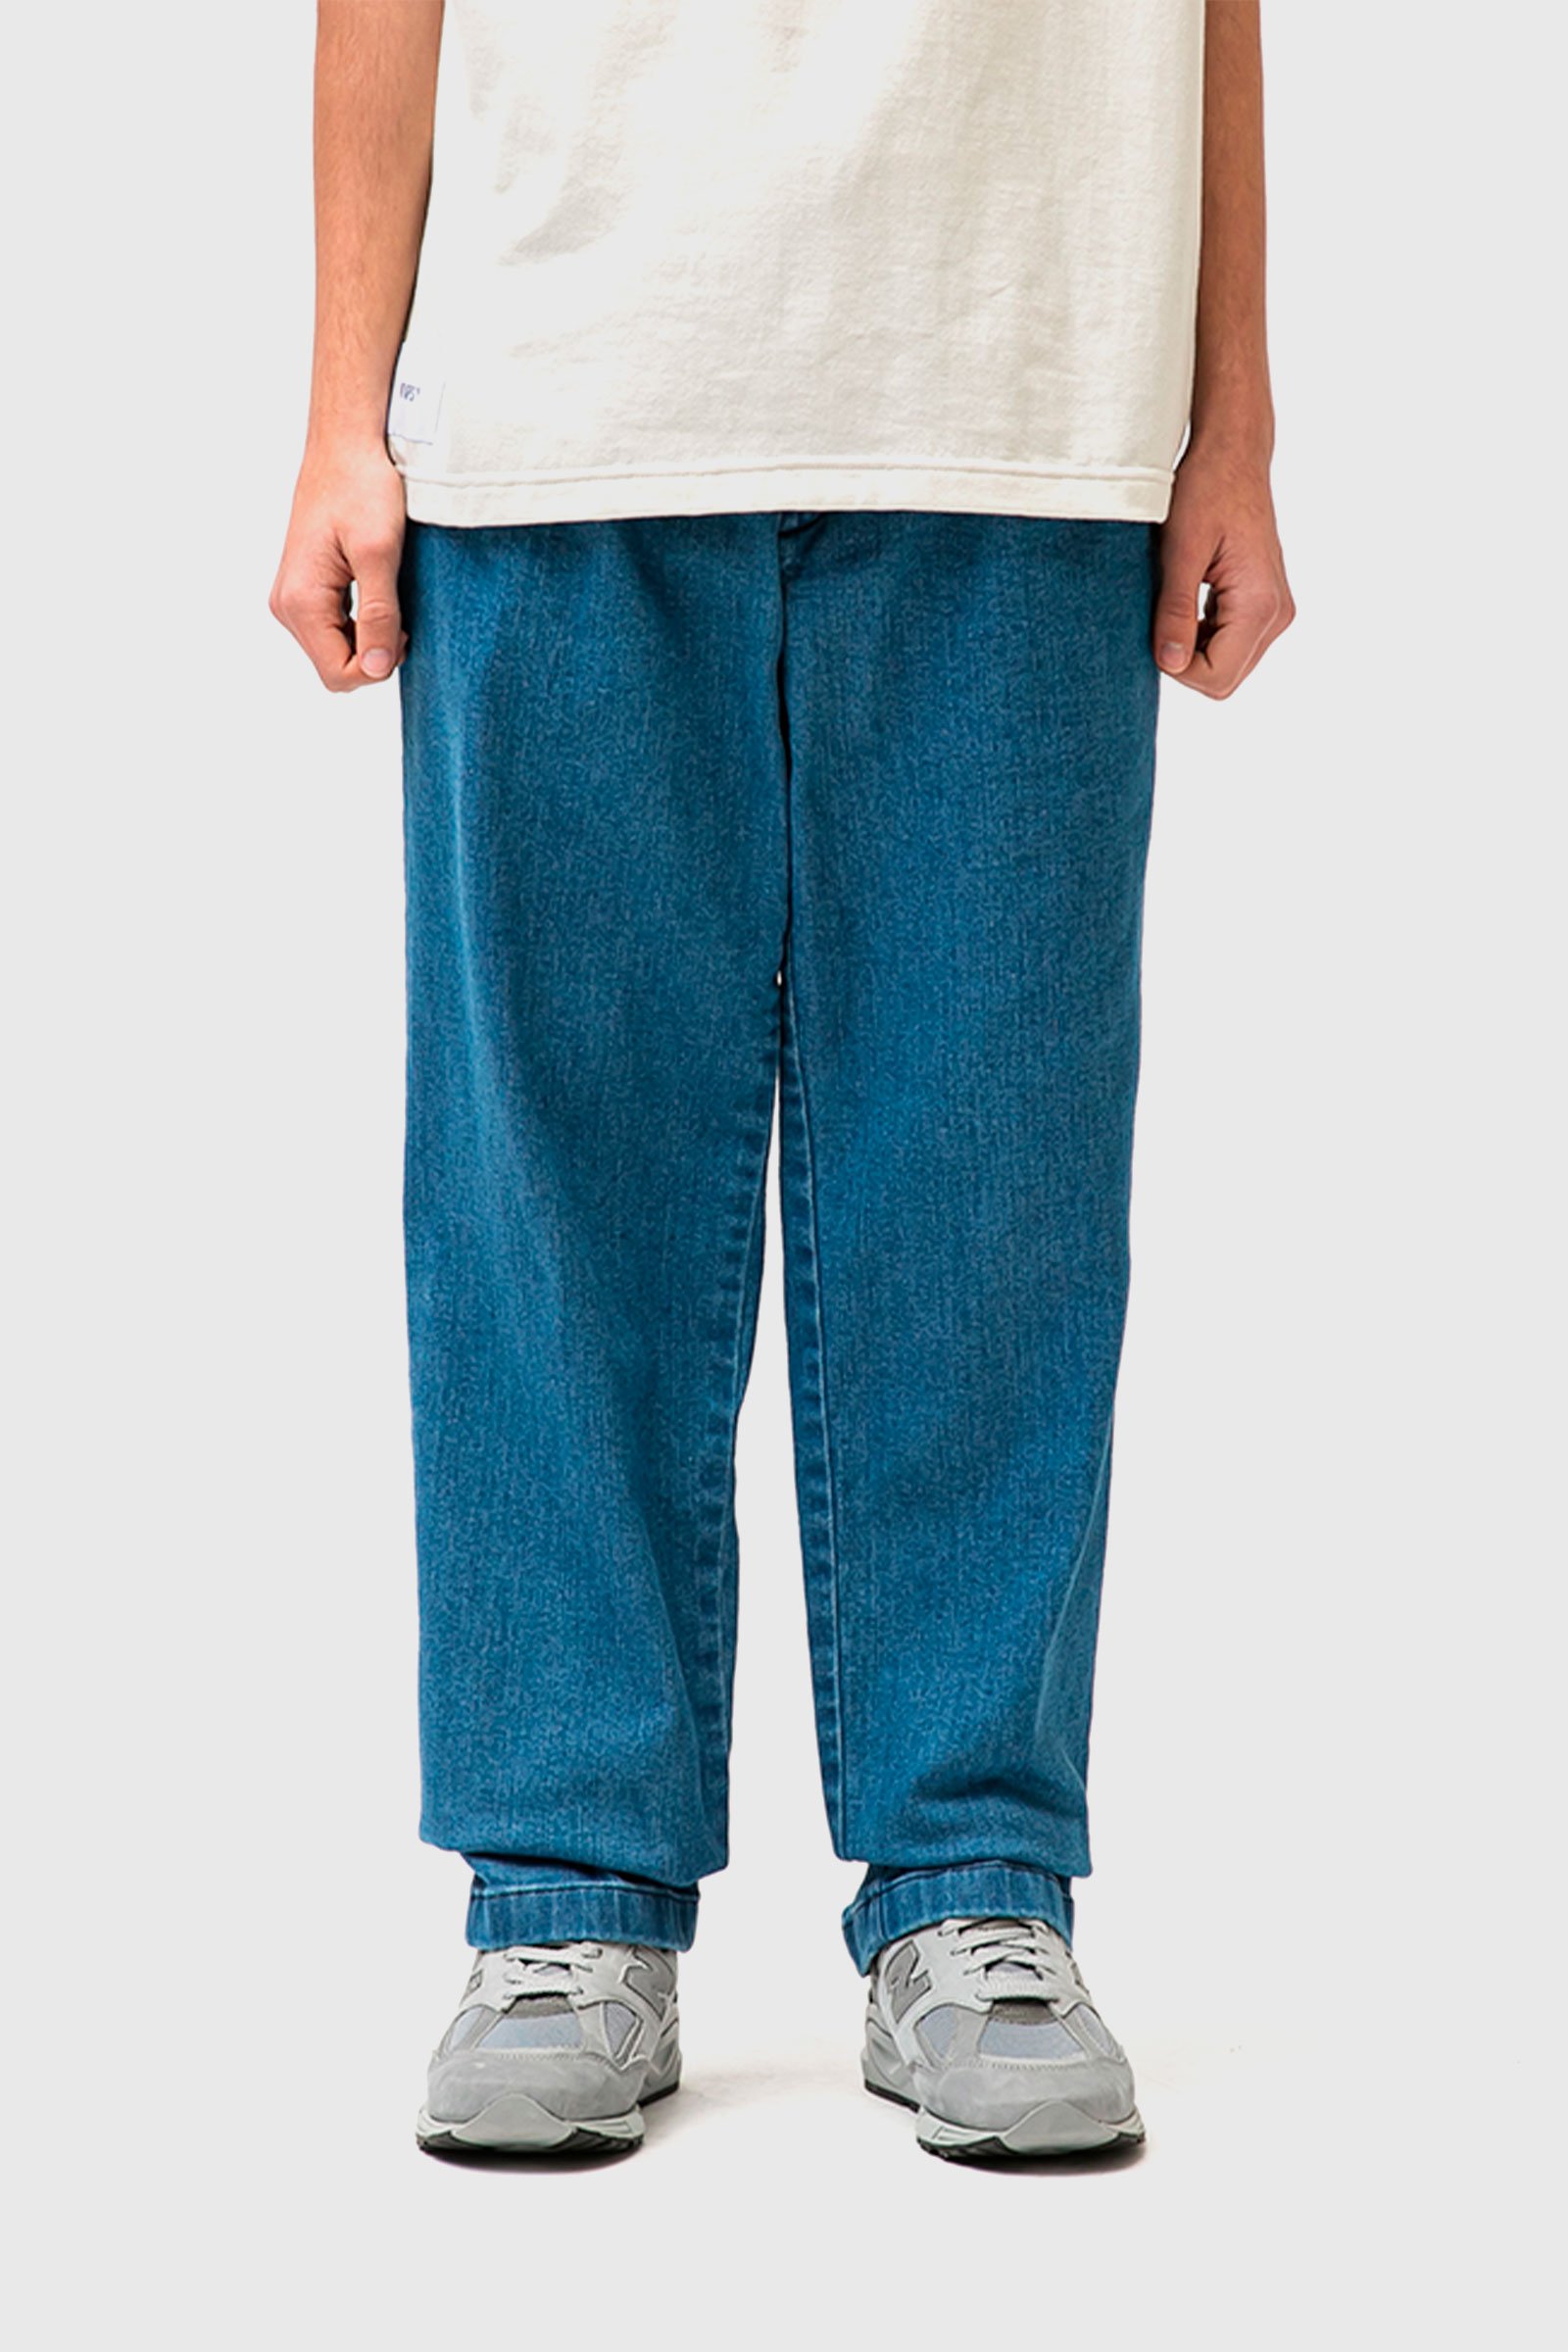 L 21aw wtaps TUCK 02 / TROUSERS / COTTON-